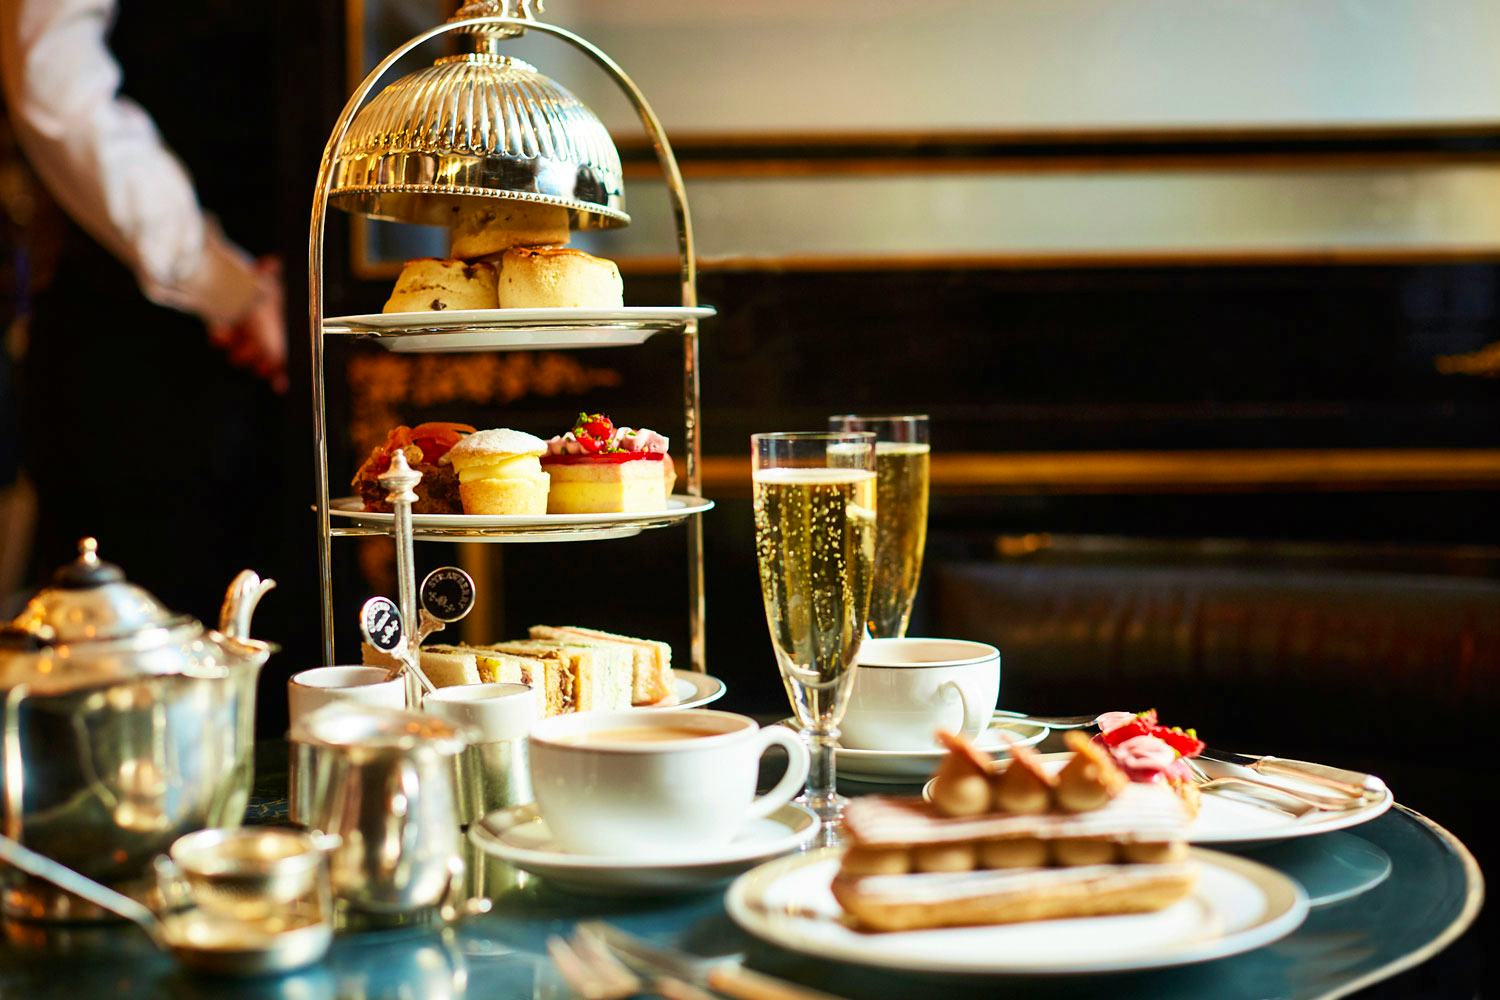 Afternoon tea dishes at The Wolseley